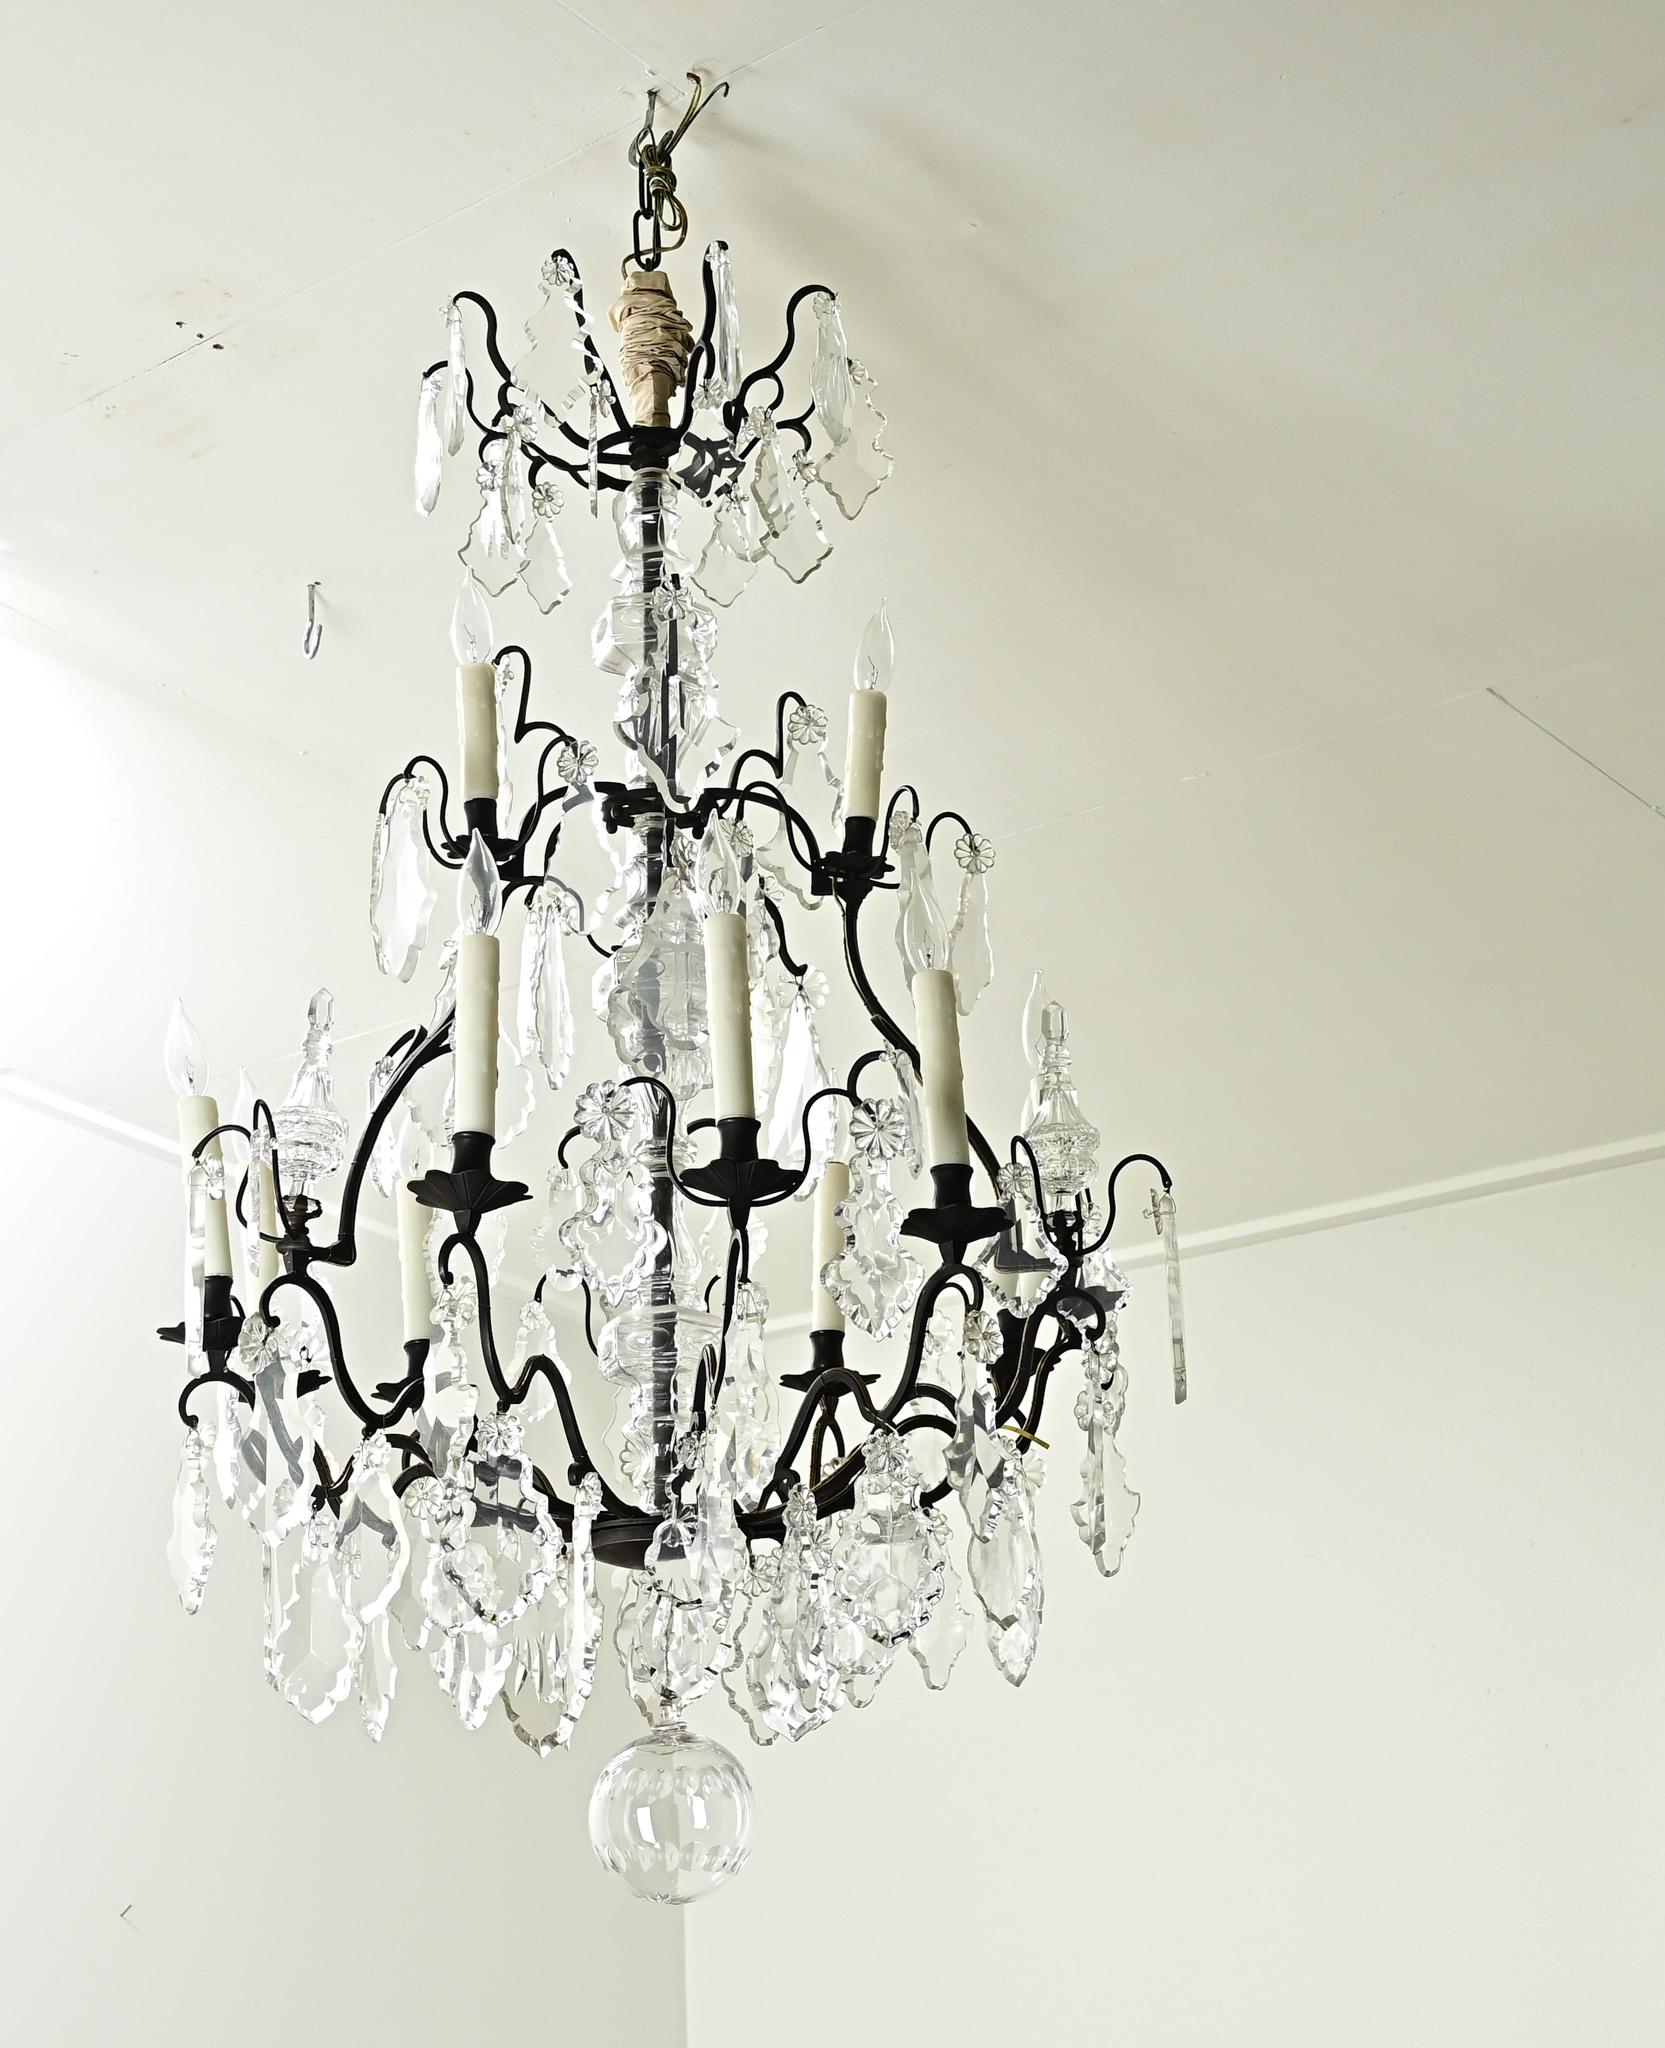 A large French twelve light bronze and crystal chandelier from the 1800’s. This statement chandelier has a bronze frame with cut crystal drops and cut crystal floral designs hanging from twelve scalloped chandelier arms with faux wax candle covers.